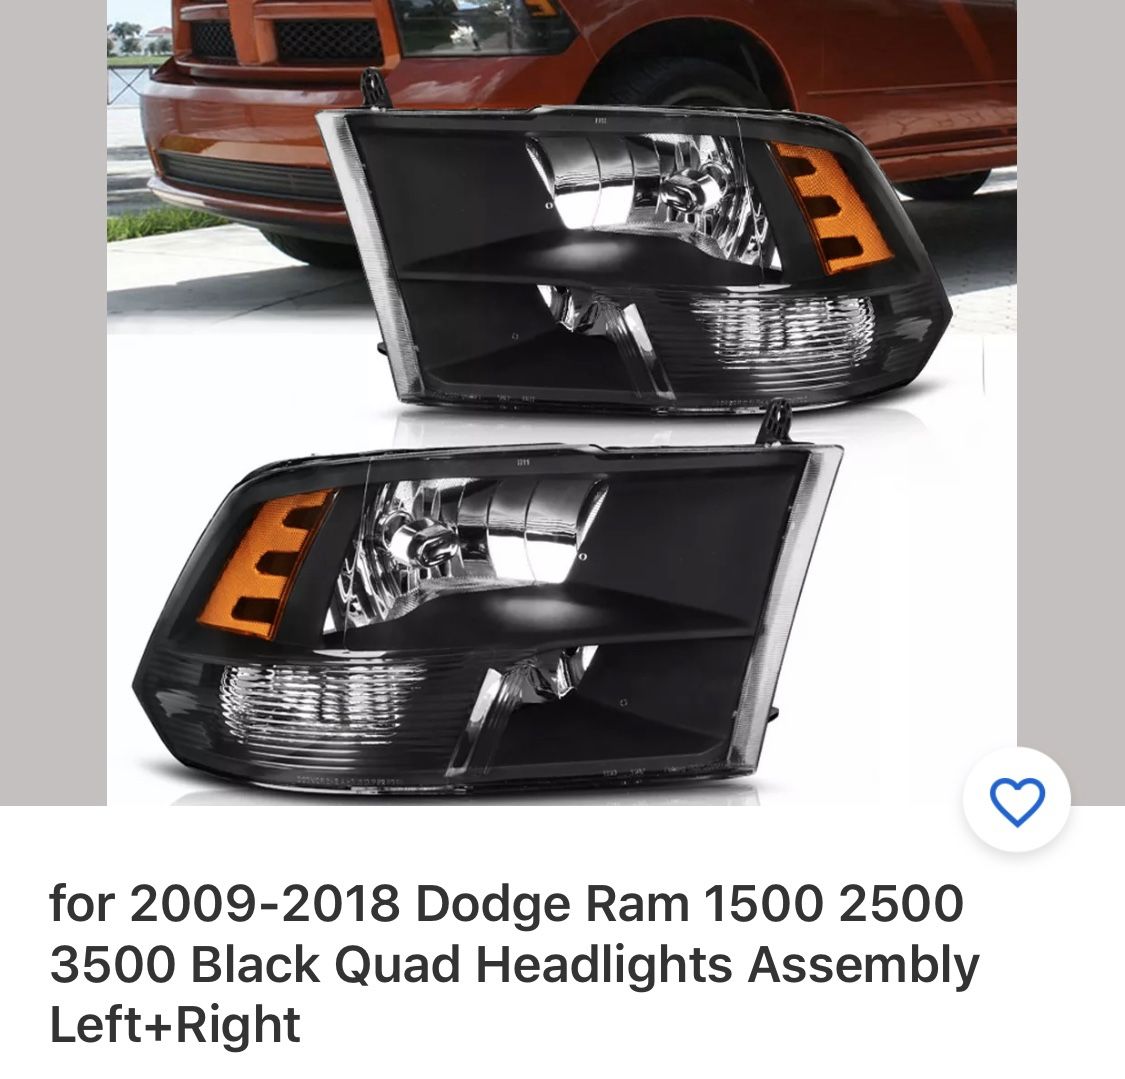 Dodge Black quad headlights assembly left and right